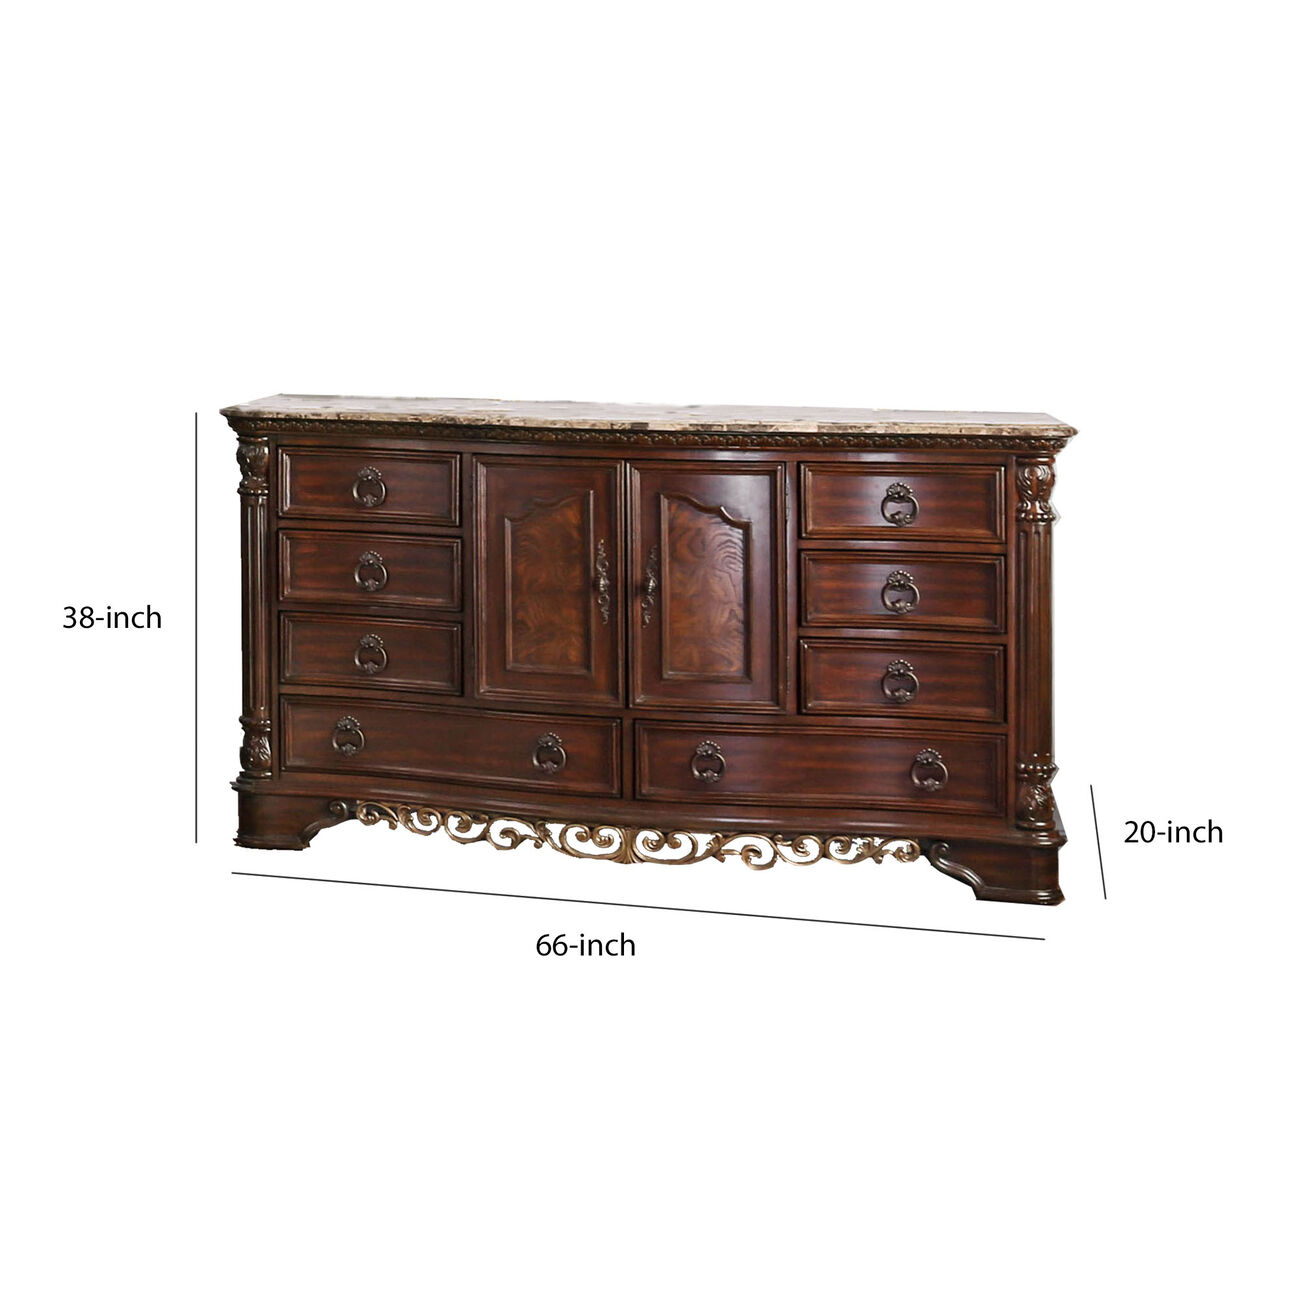 8 Drawer Wooden Dresser with 2 Door Cabinet and Marble Top, Brown